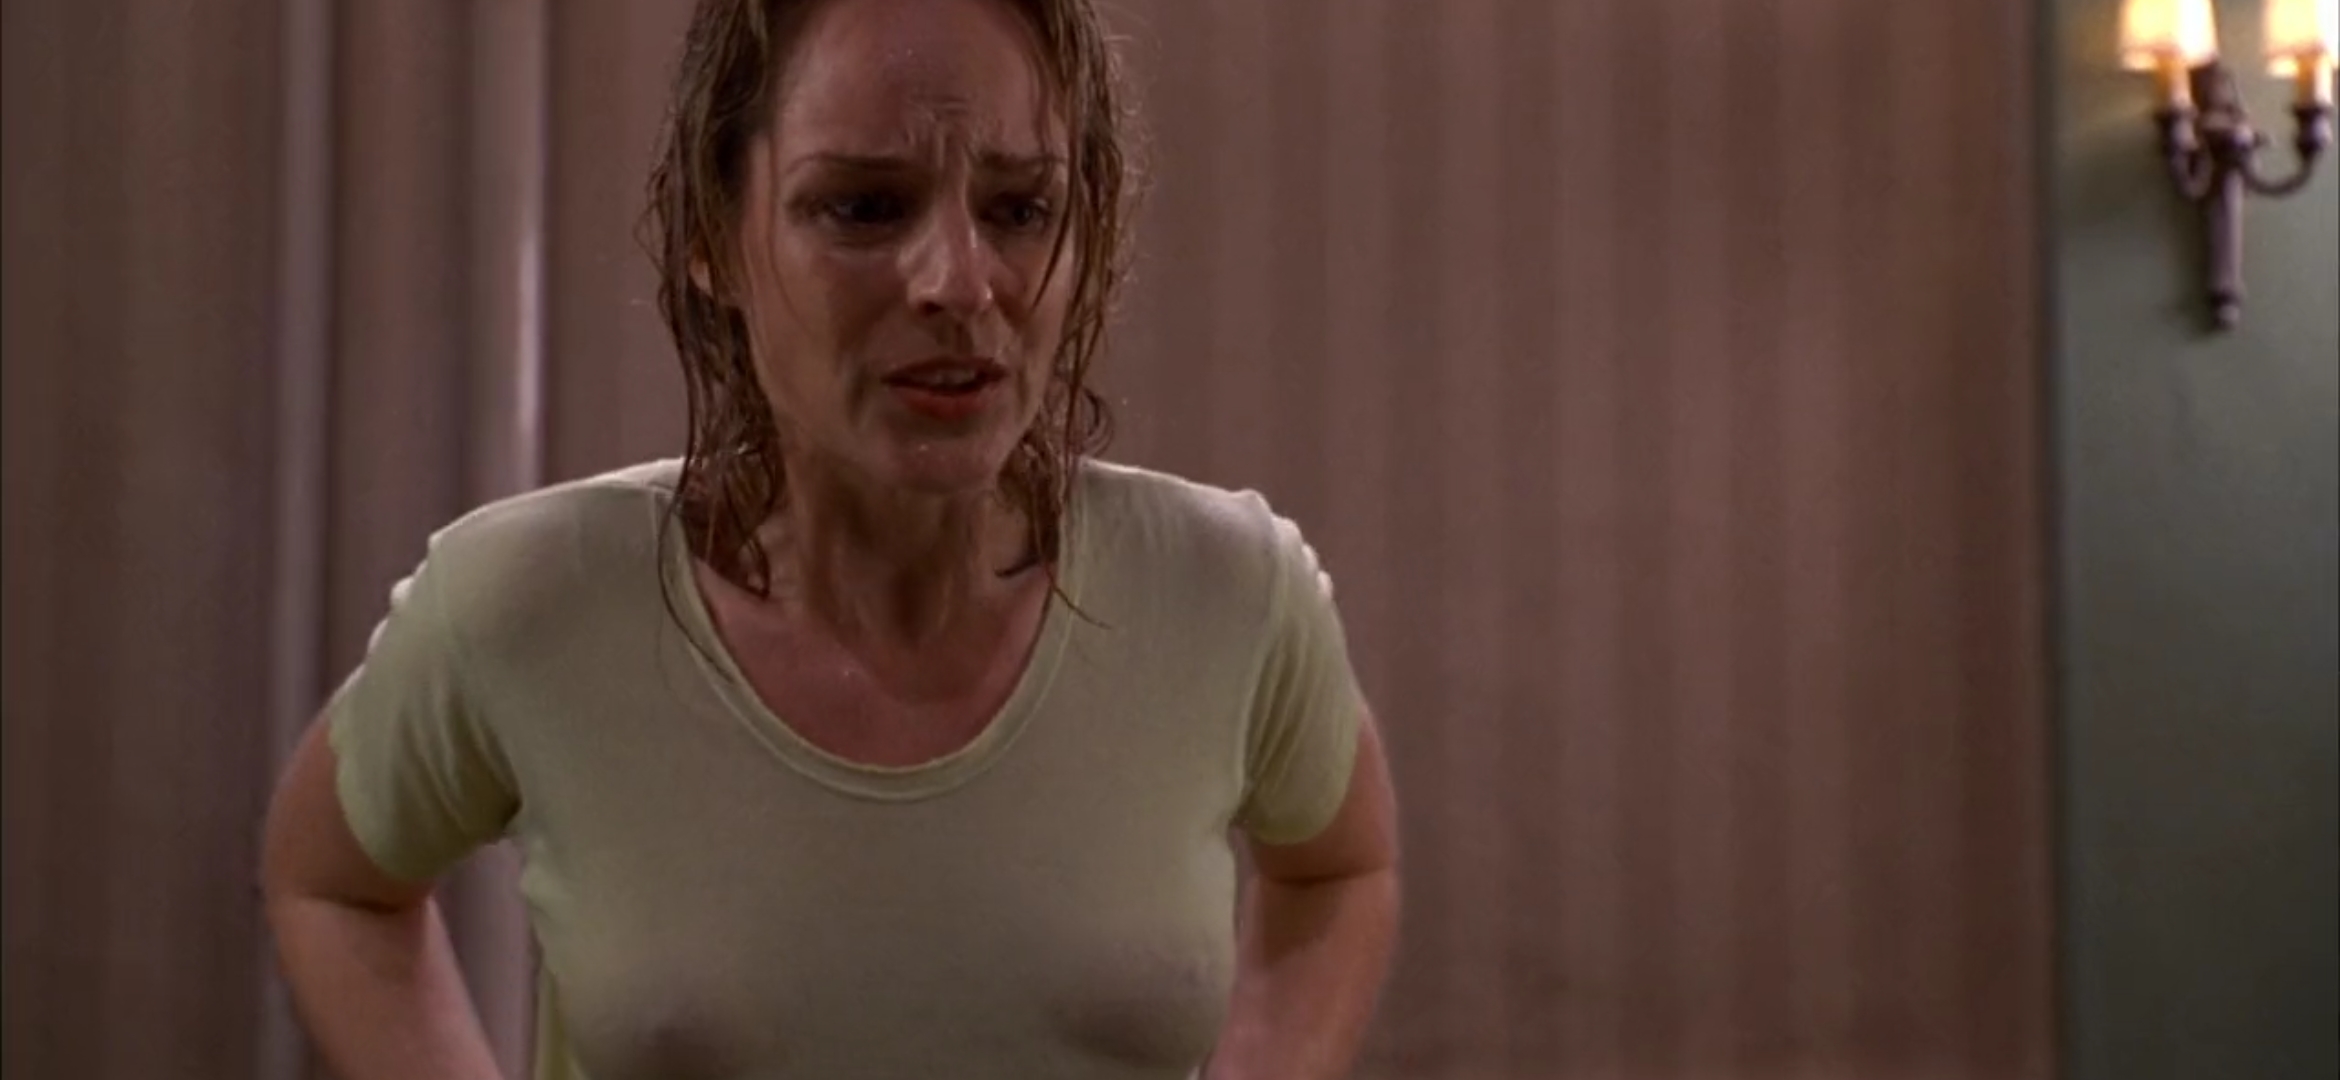 andy addis recommends helen hunt sexy photos pic